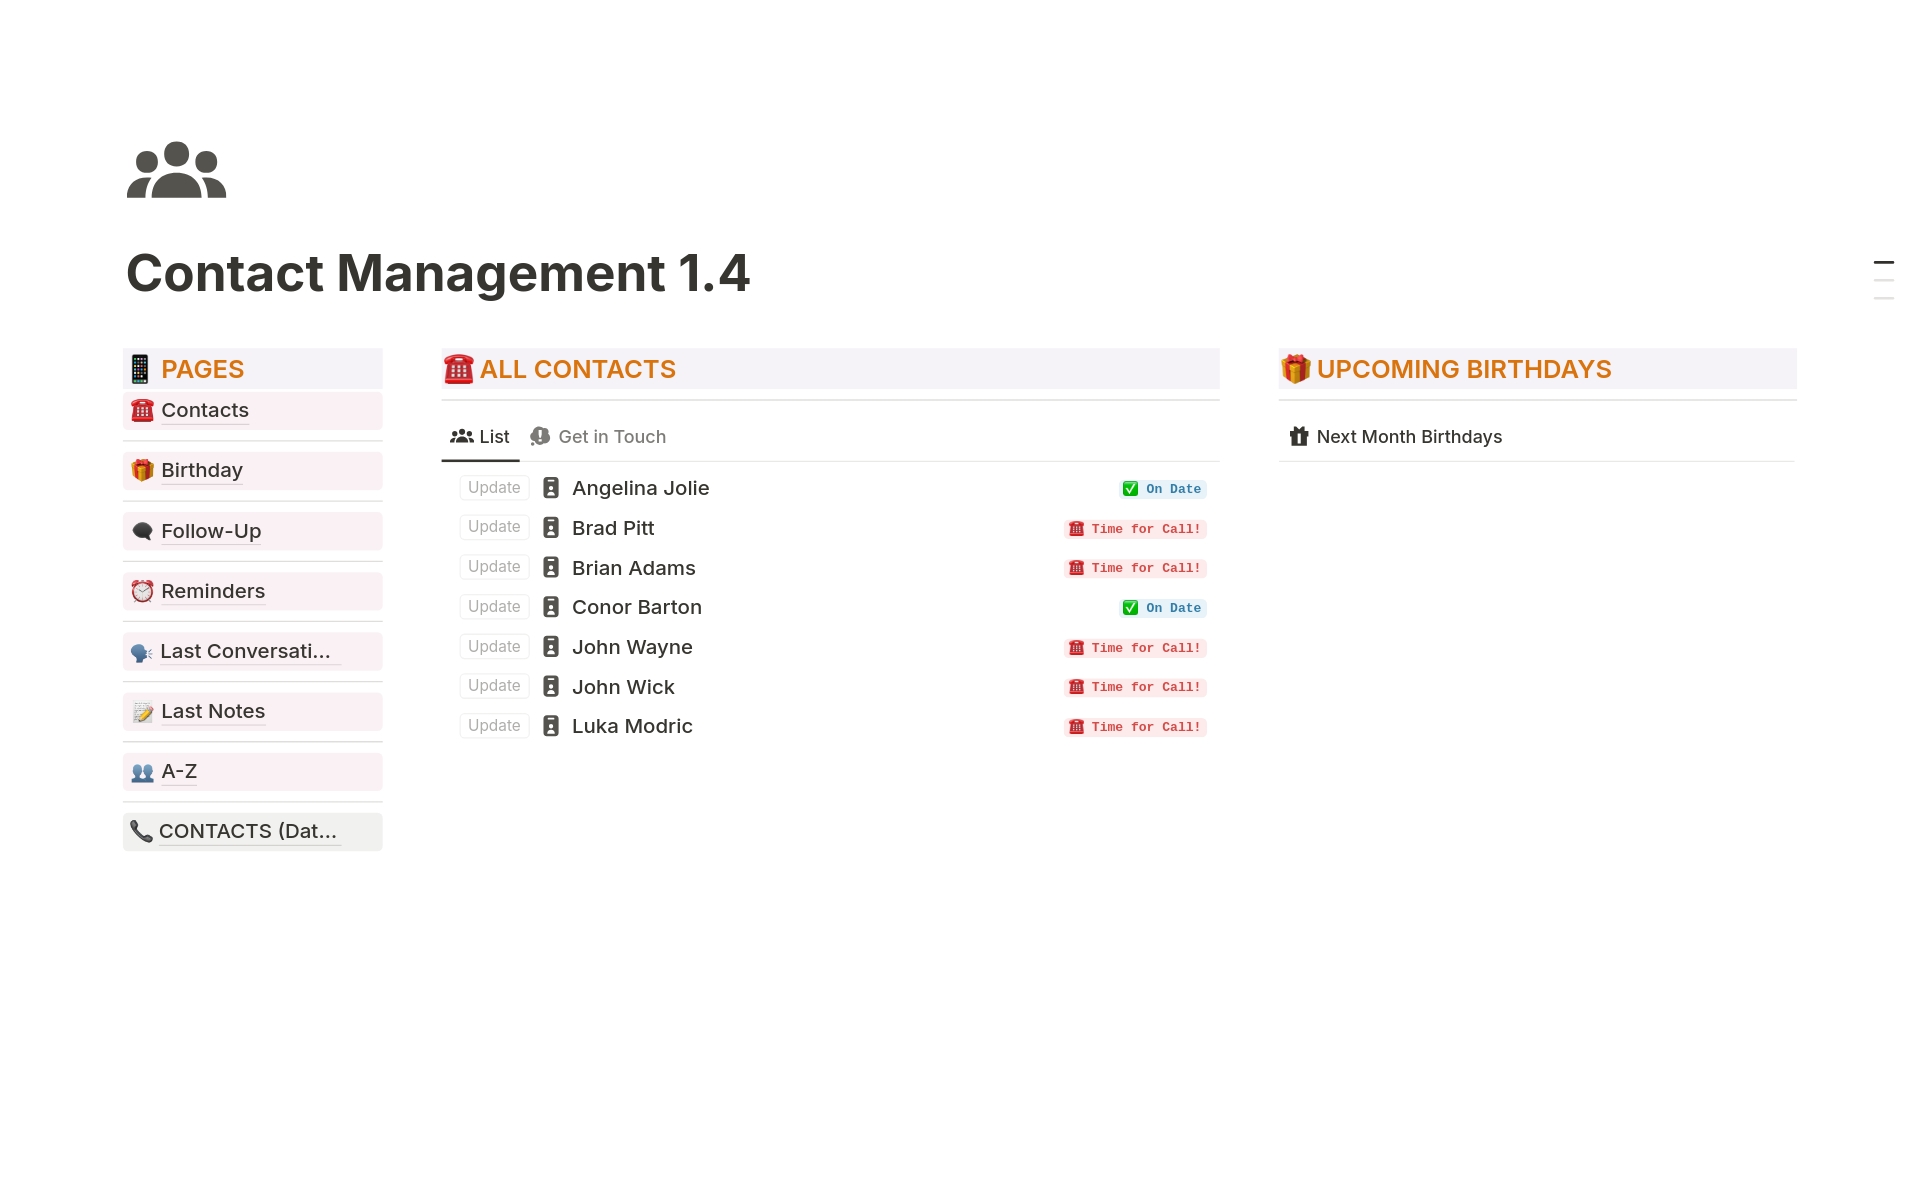 Contacts Management brings solution for organizing and managing contact information for both personal and professional purposes.